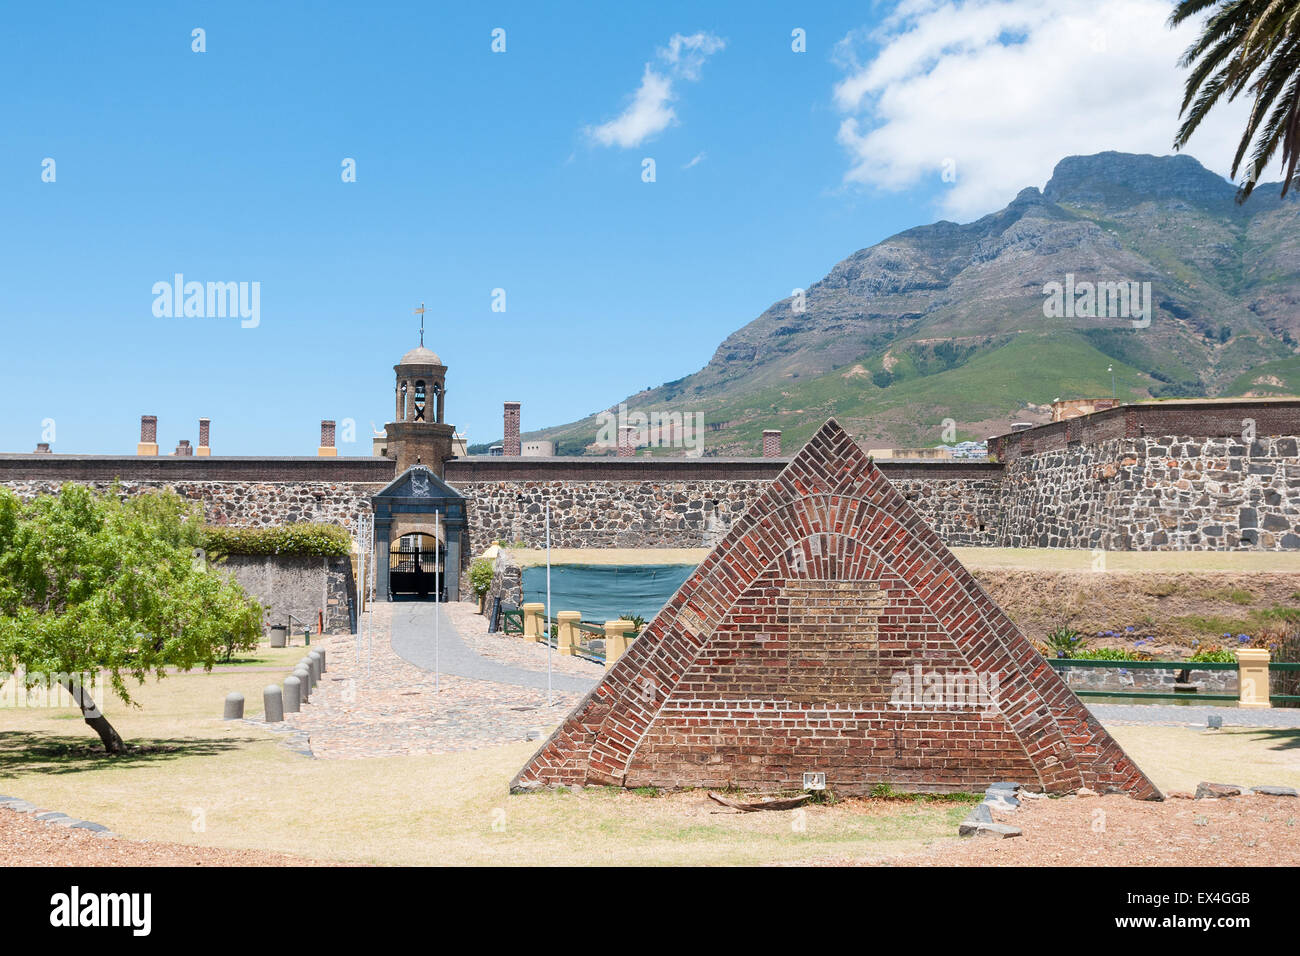 Powder magazine in front of the Castle of Good Hope in Cape Town. Built by the Dutch East India Company between 1666 and 1679 an Stock Photo